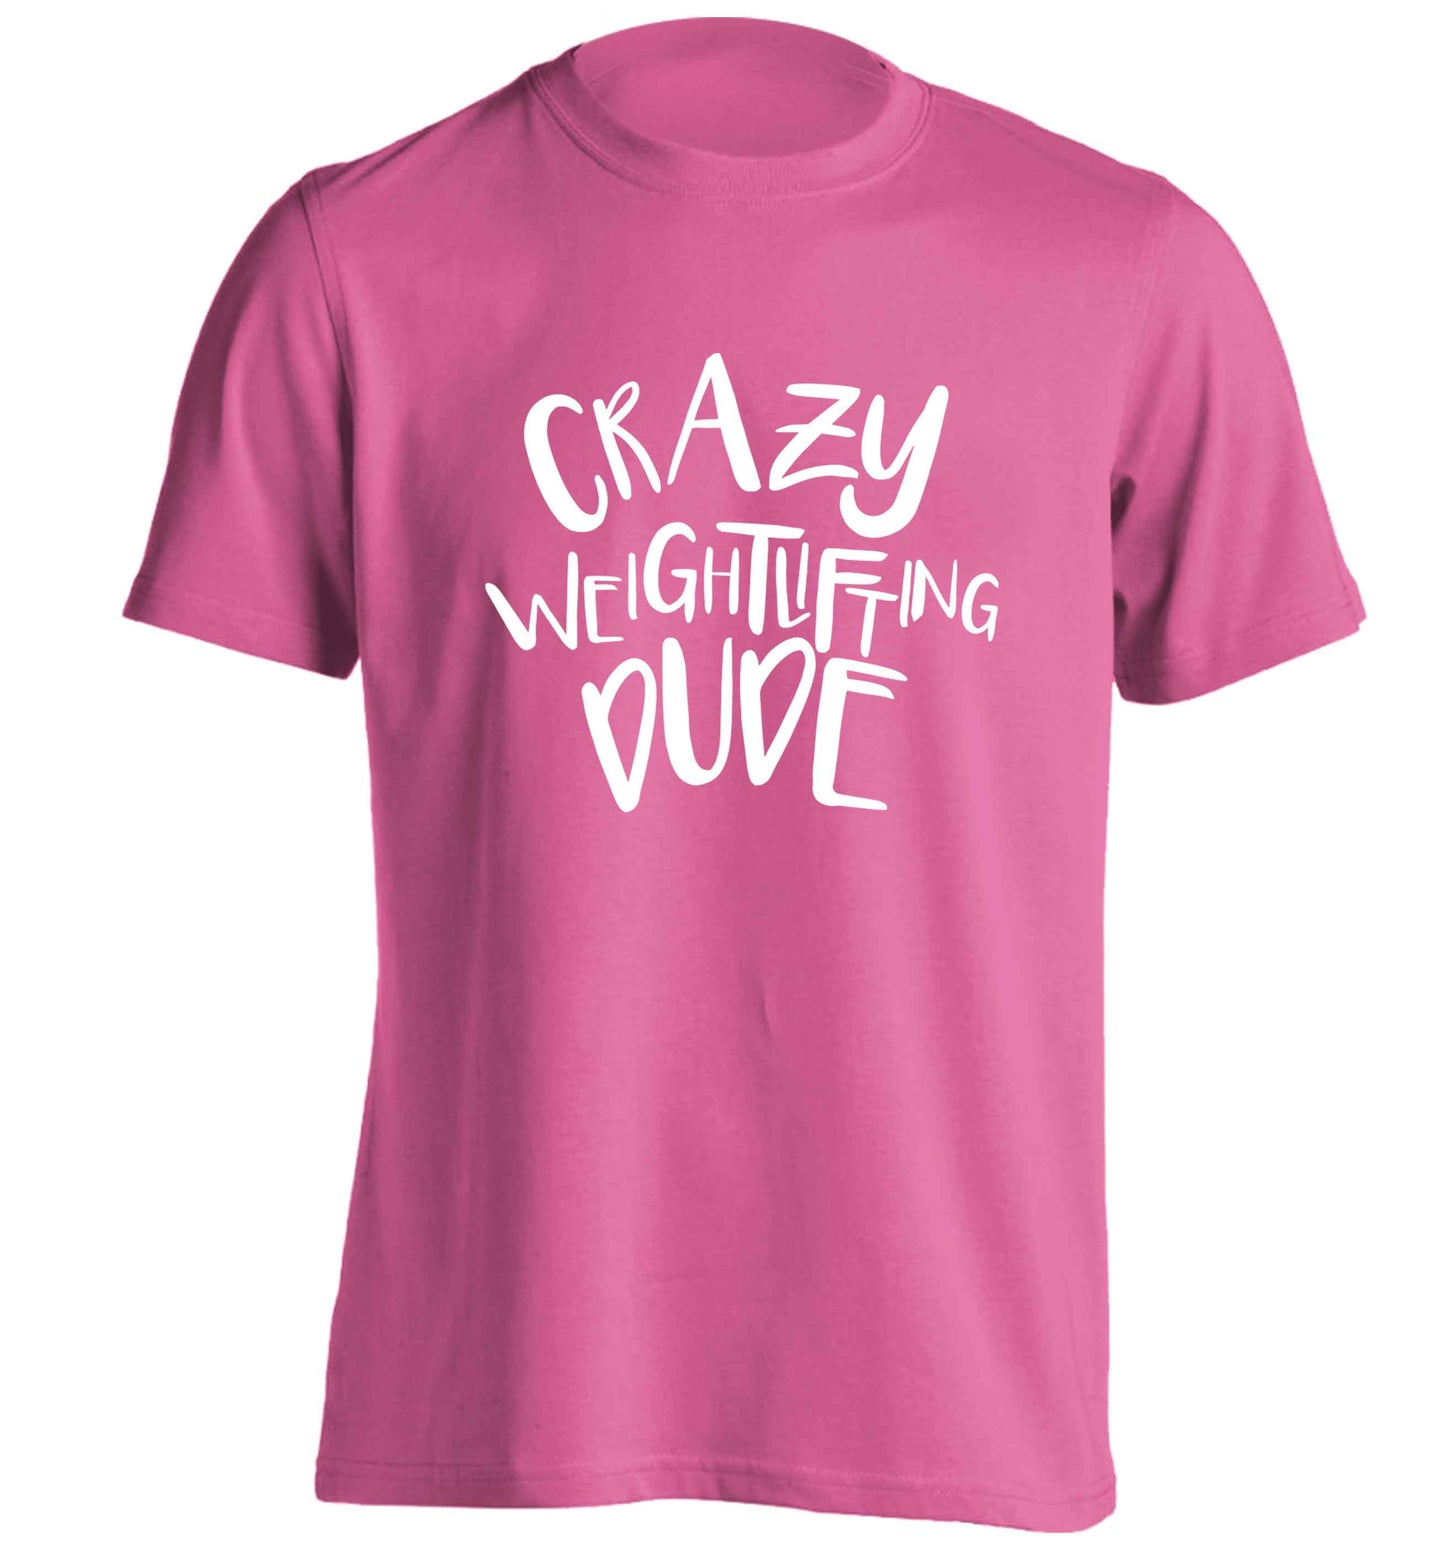 Crazy weightlifting dude adults unisex pink Tshirt 2XL